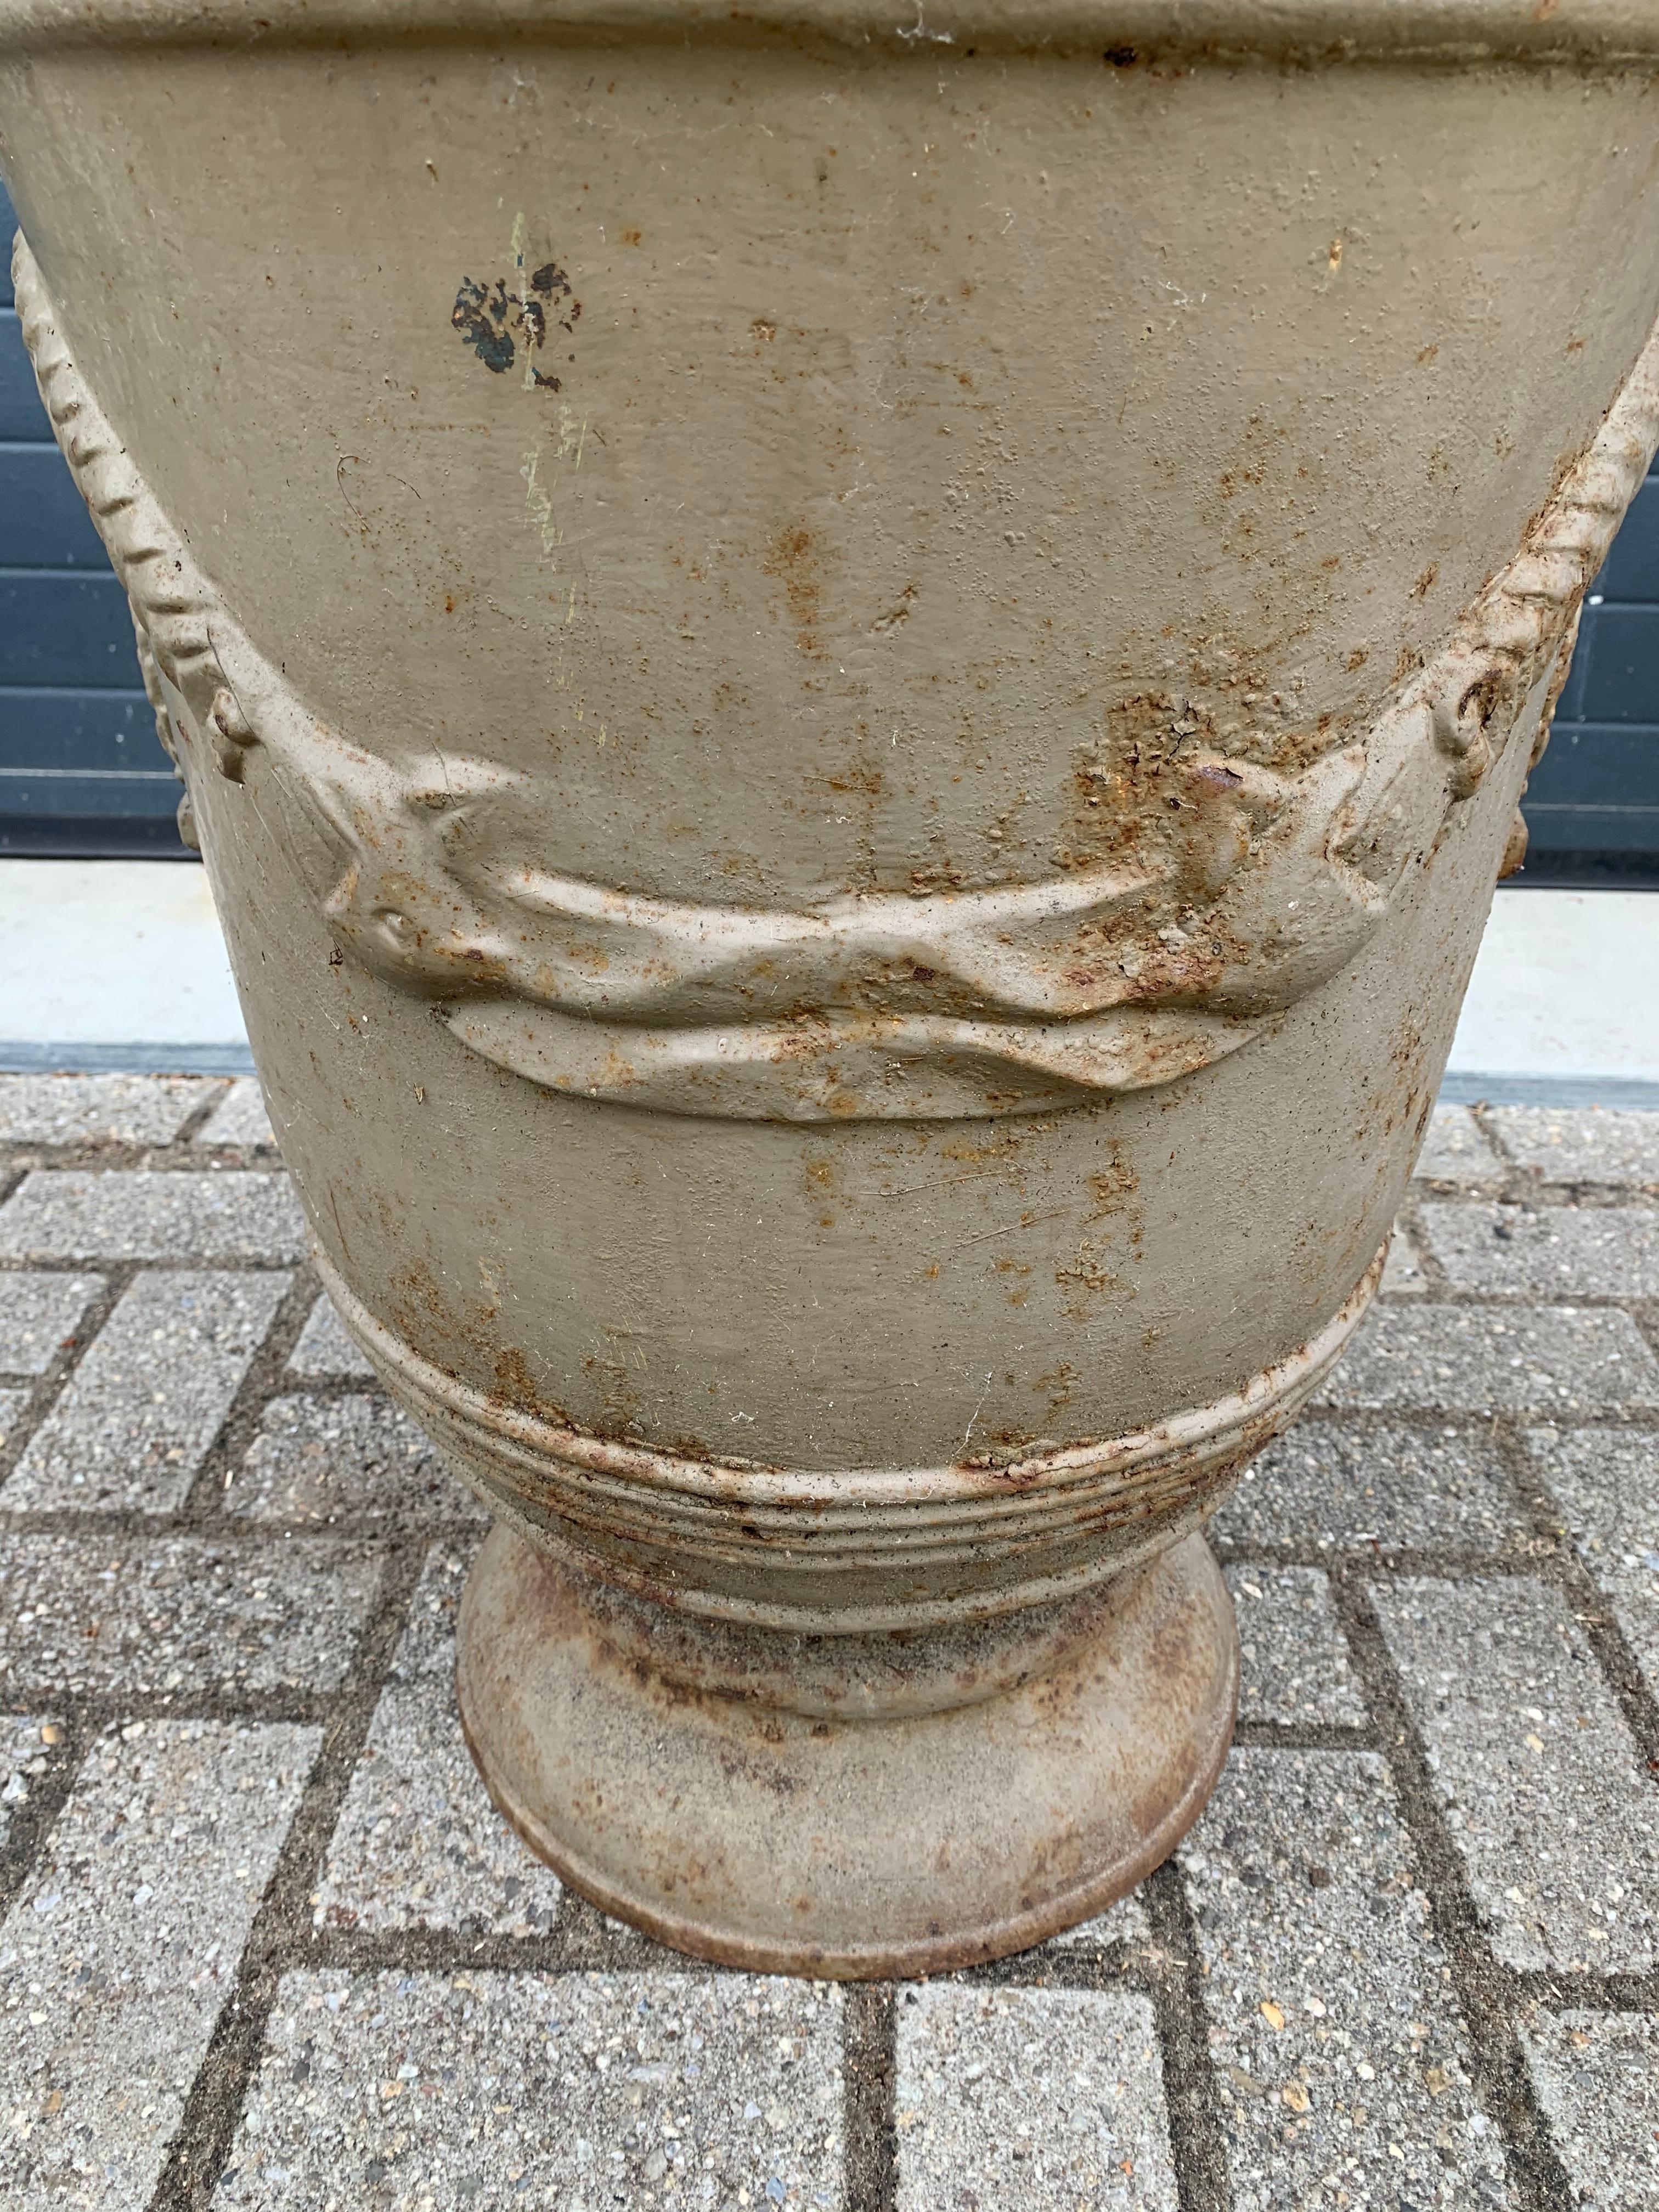 Empire Large 18th or 19th Century Antique Iron Anduze Style Garden Vase / Planter / Urn For Sale